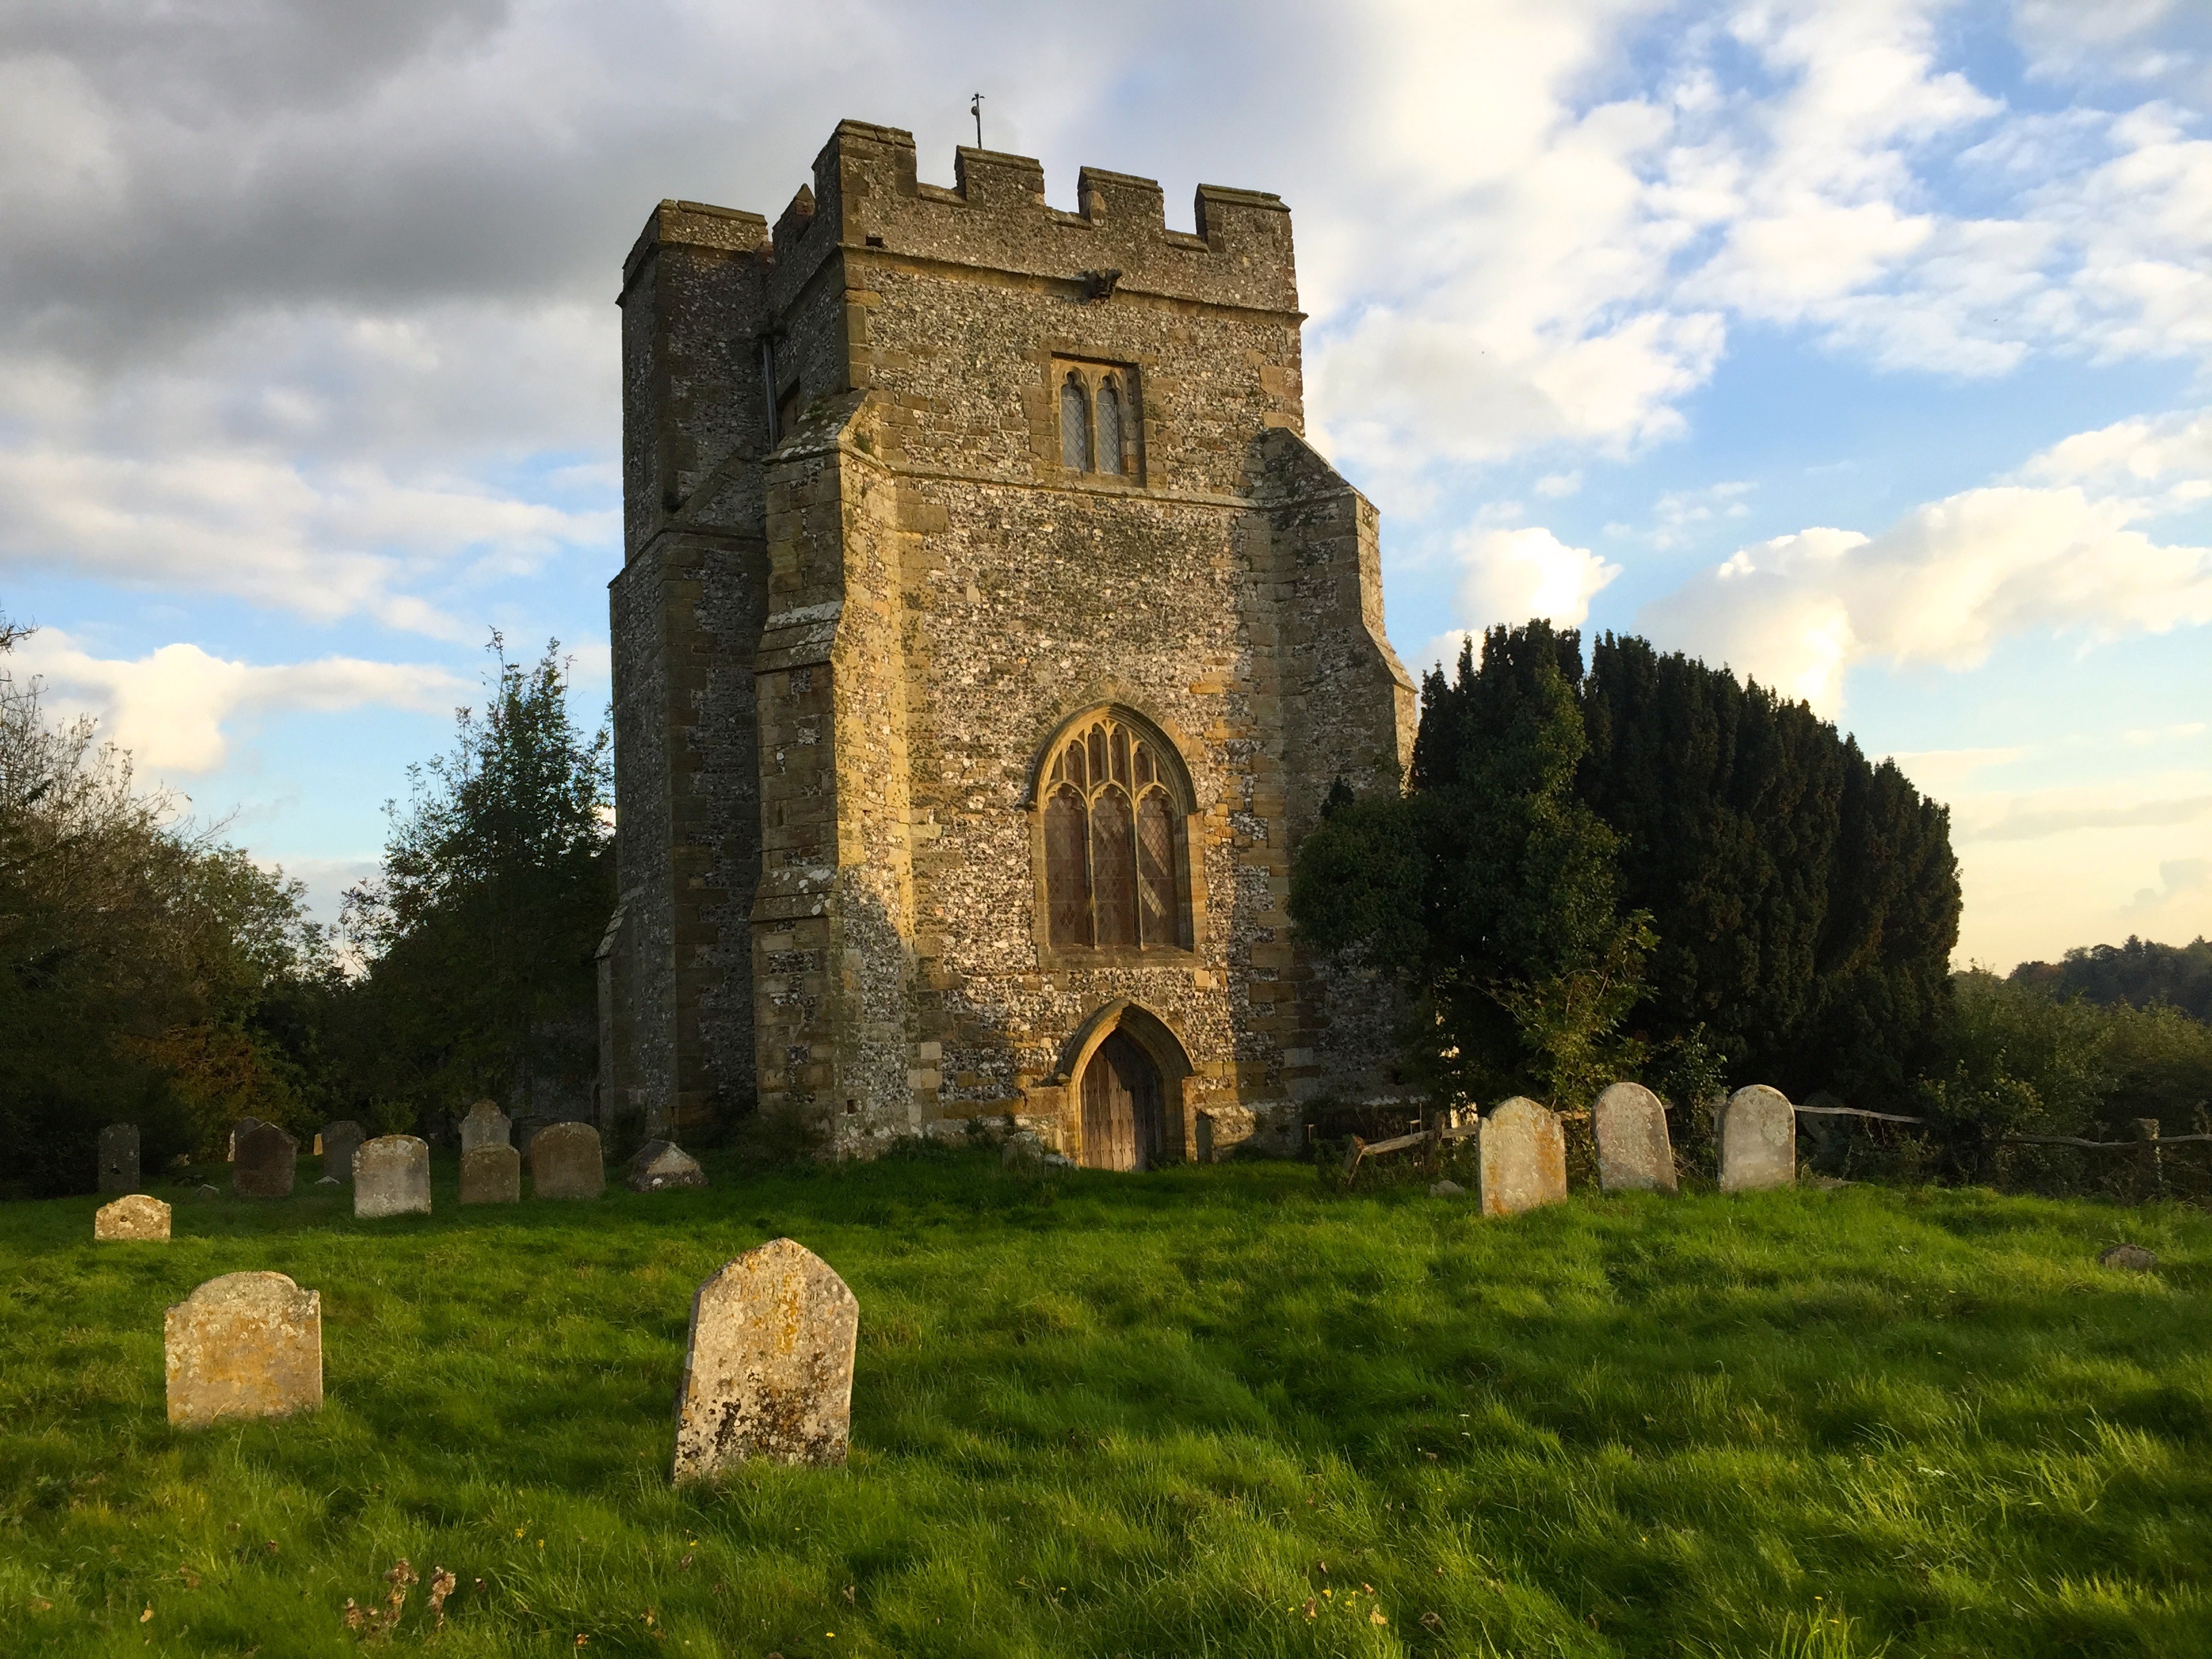 The Church of St Peter Hamsey. Photo by EP